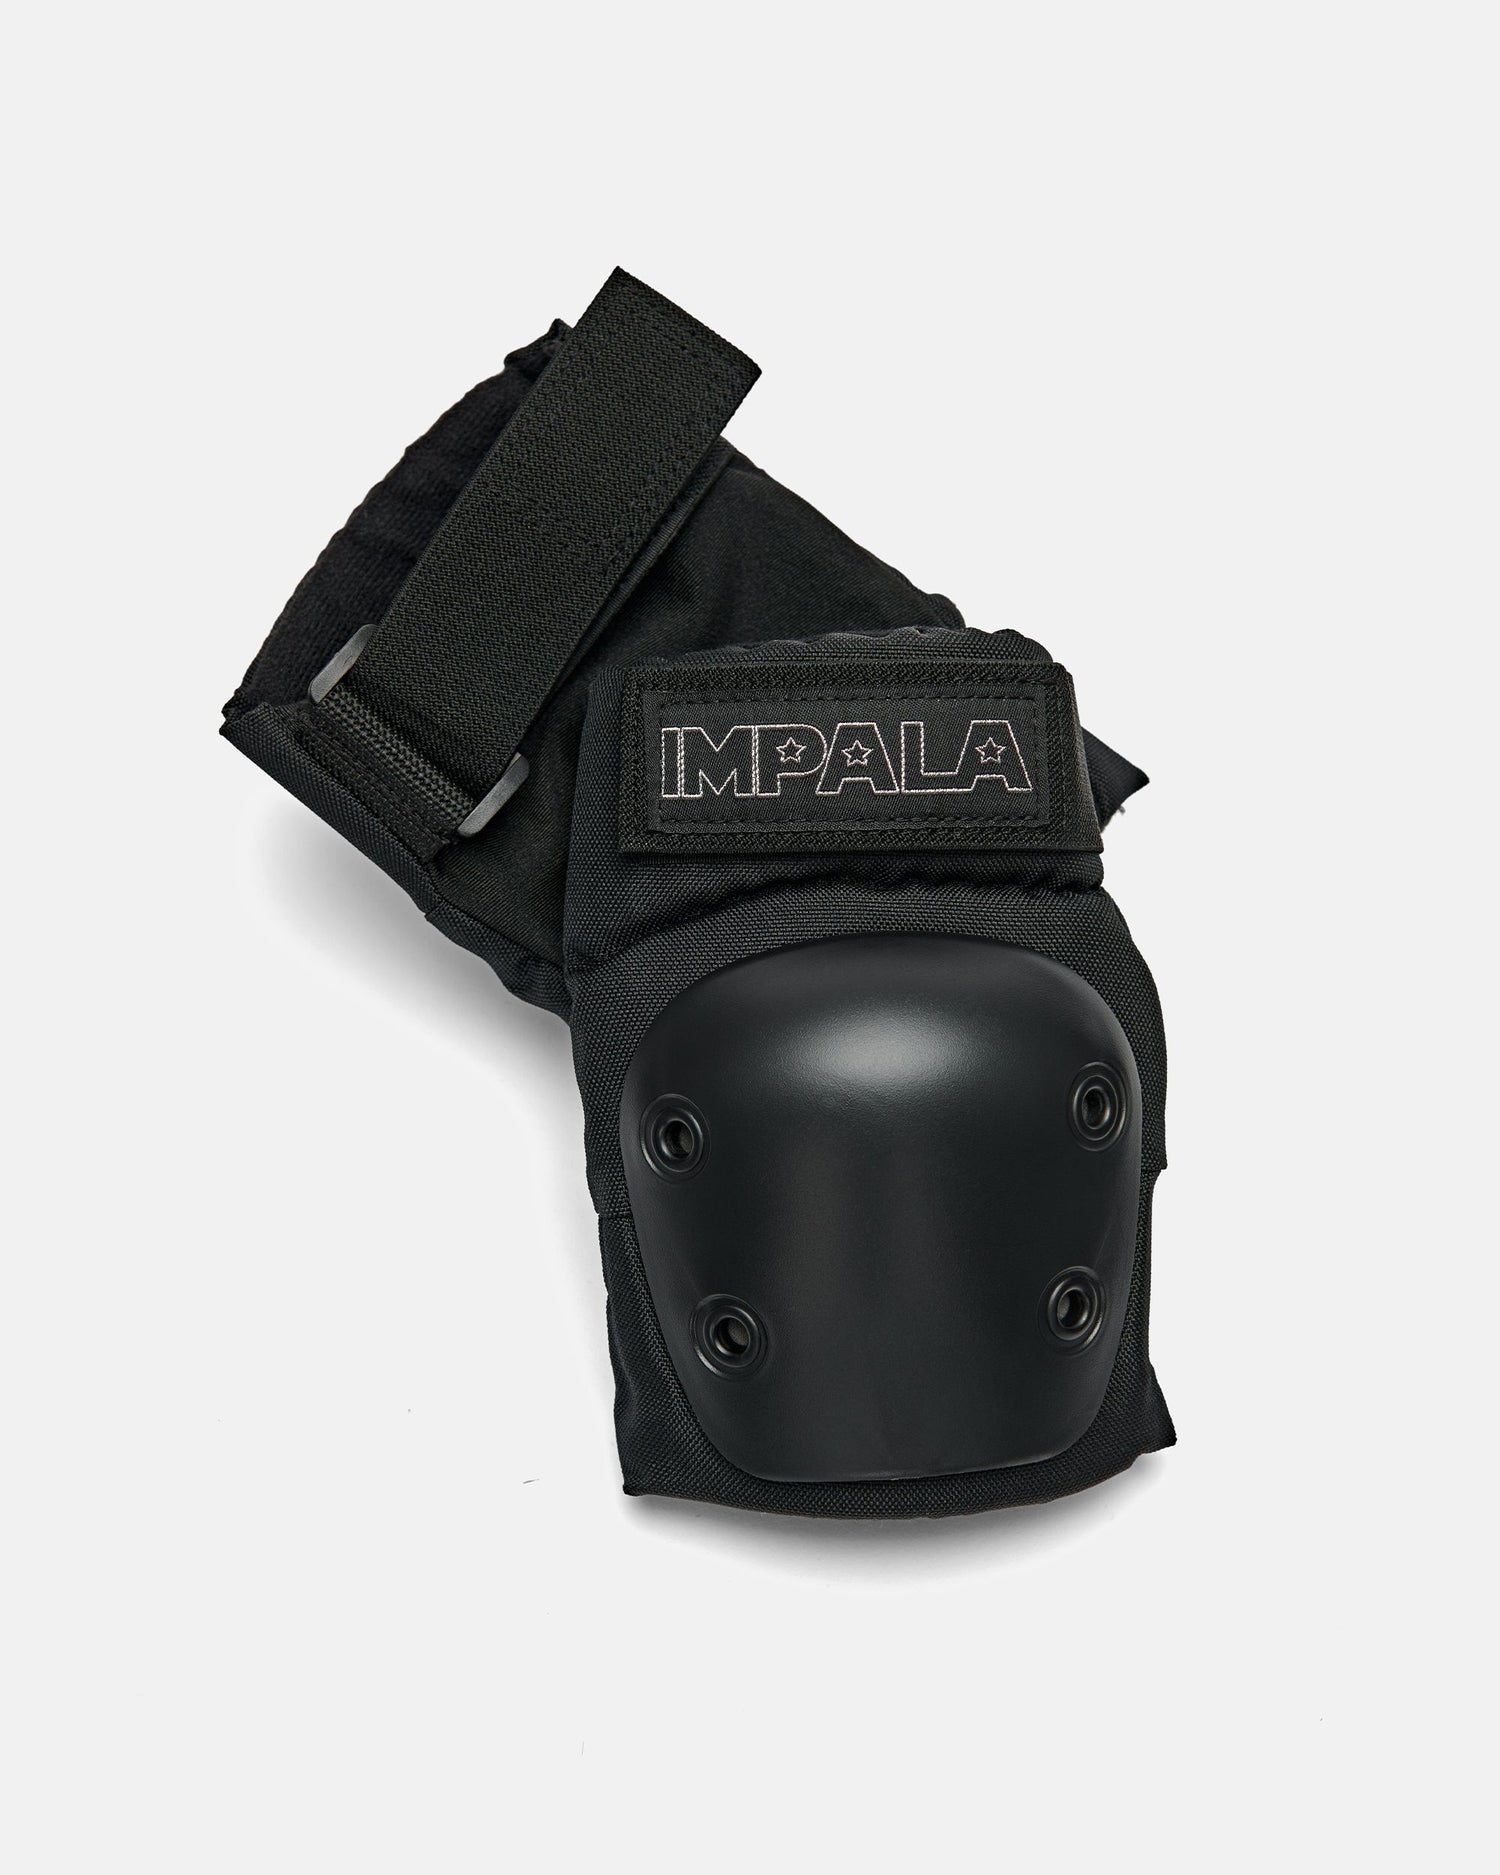 Elbow pad in the Impala Protective Set - Black